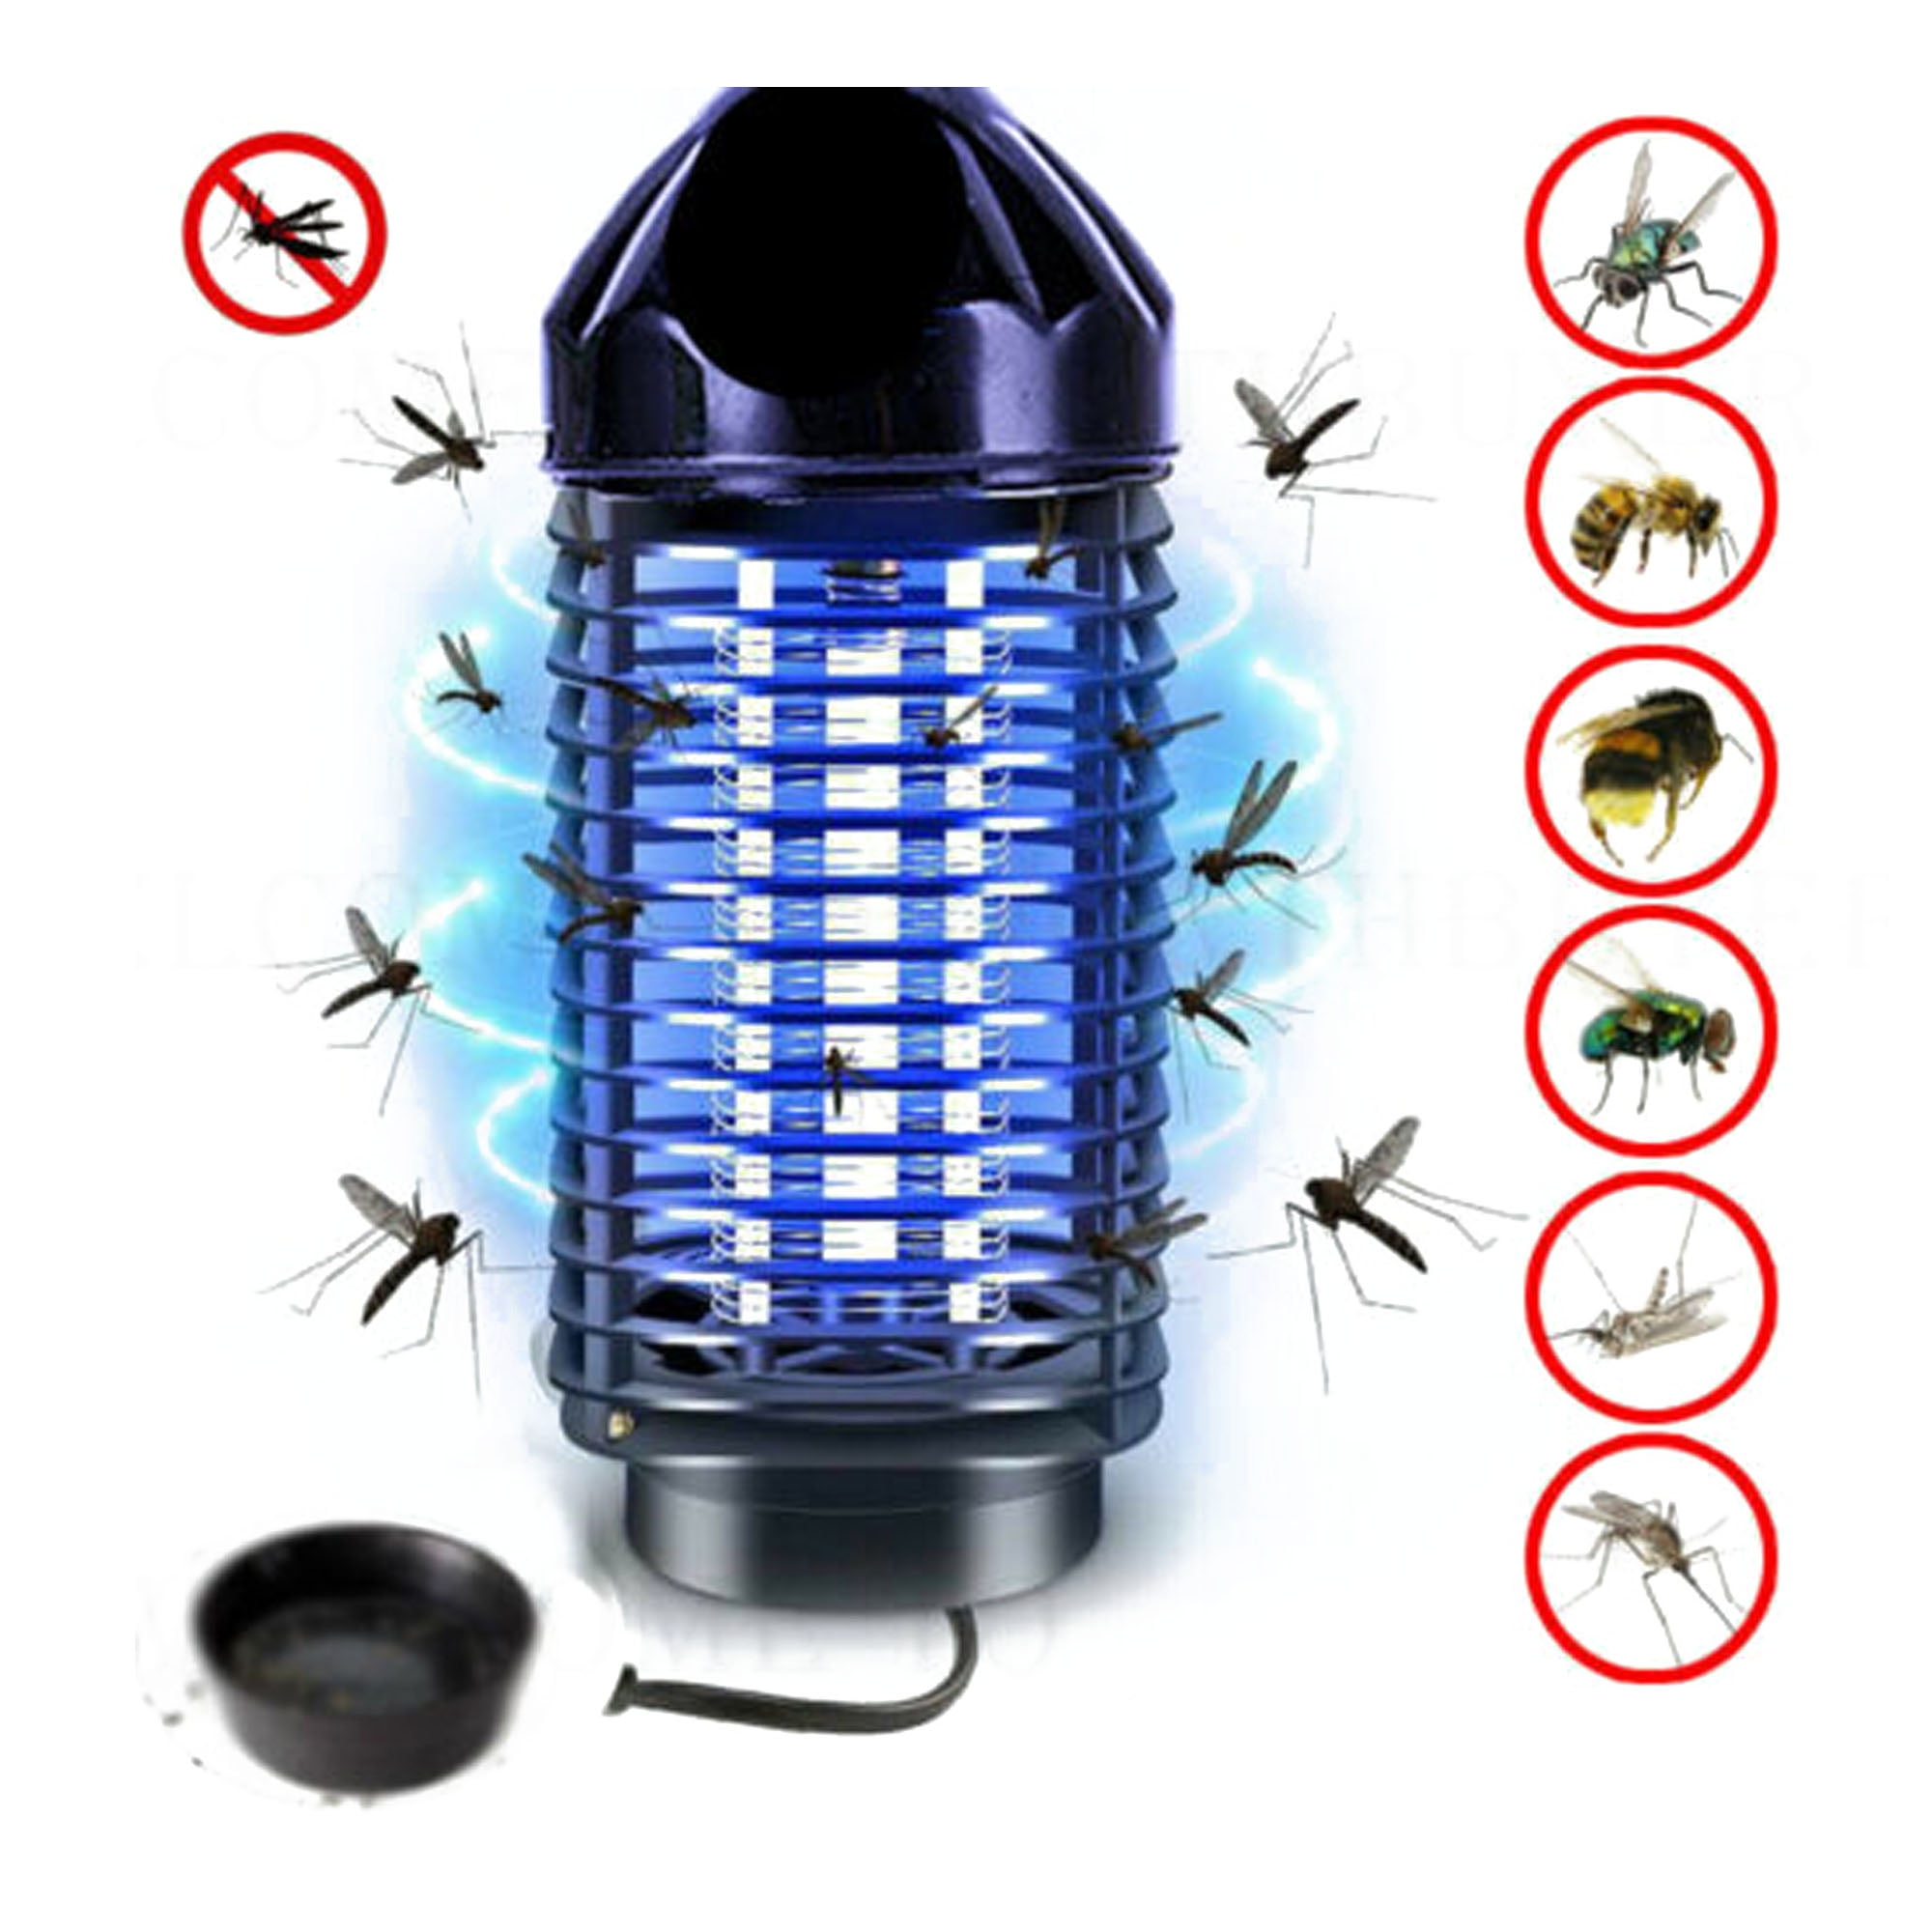 LED Electric Mosquito Fly Insect Zapper Killer Killing Lamp Light Trap Catc C6M4 